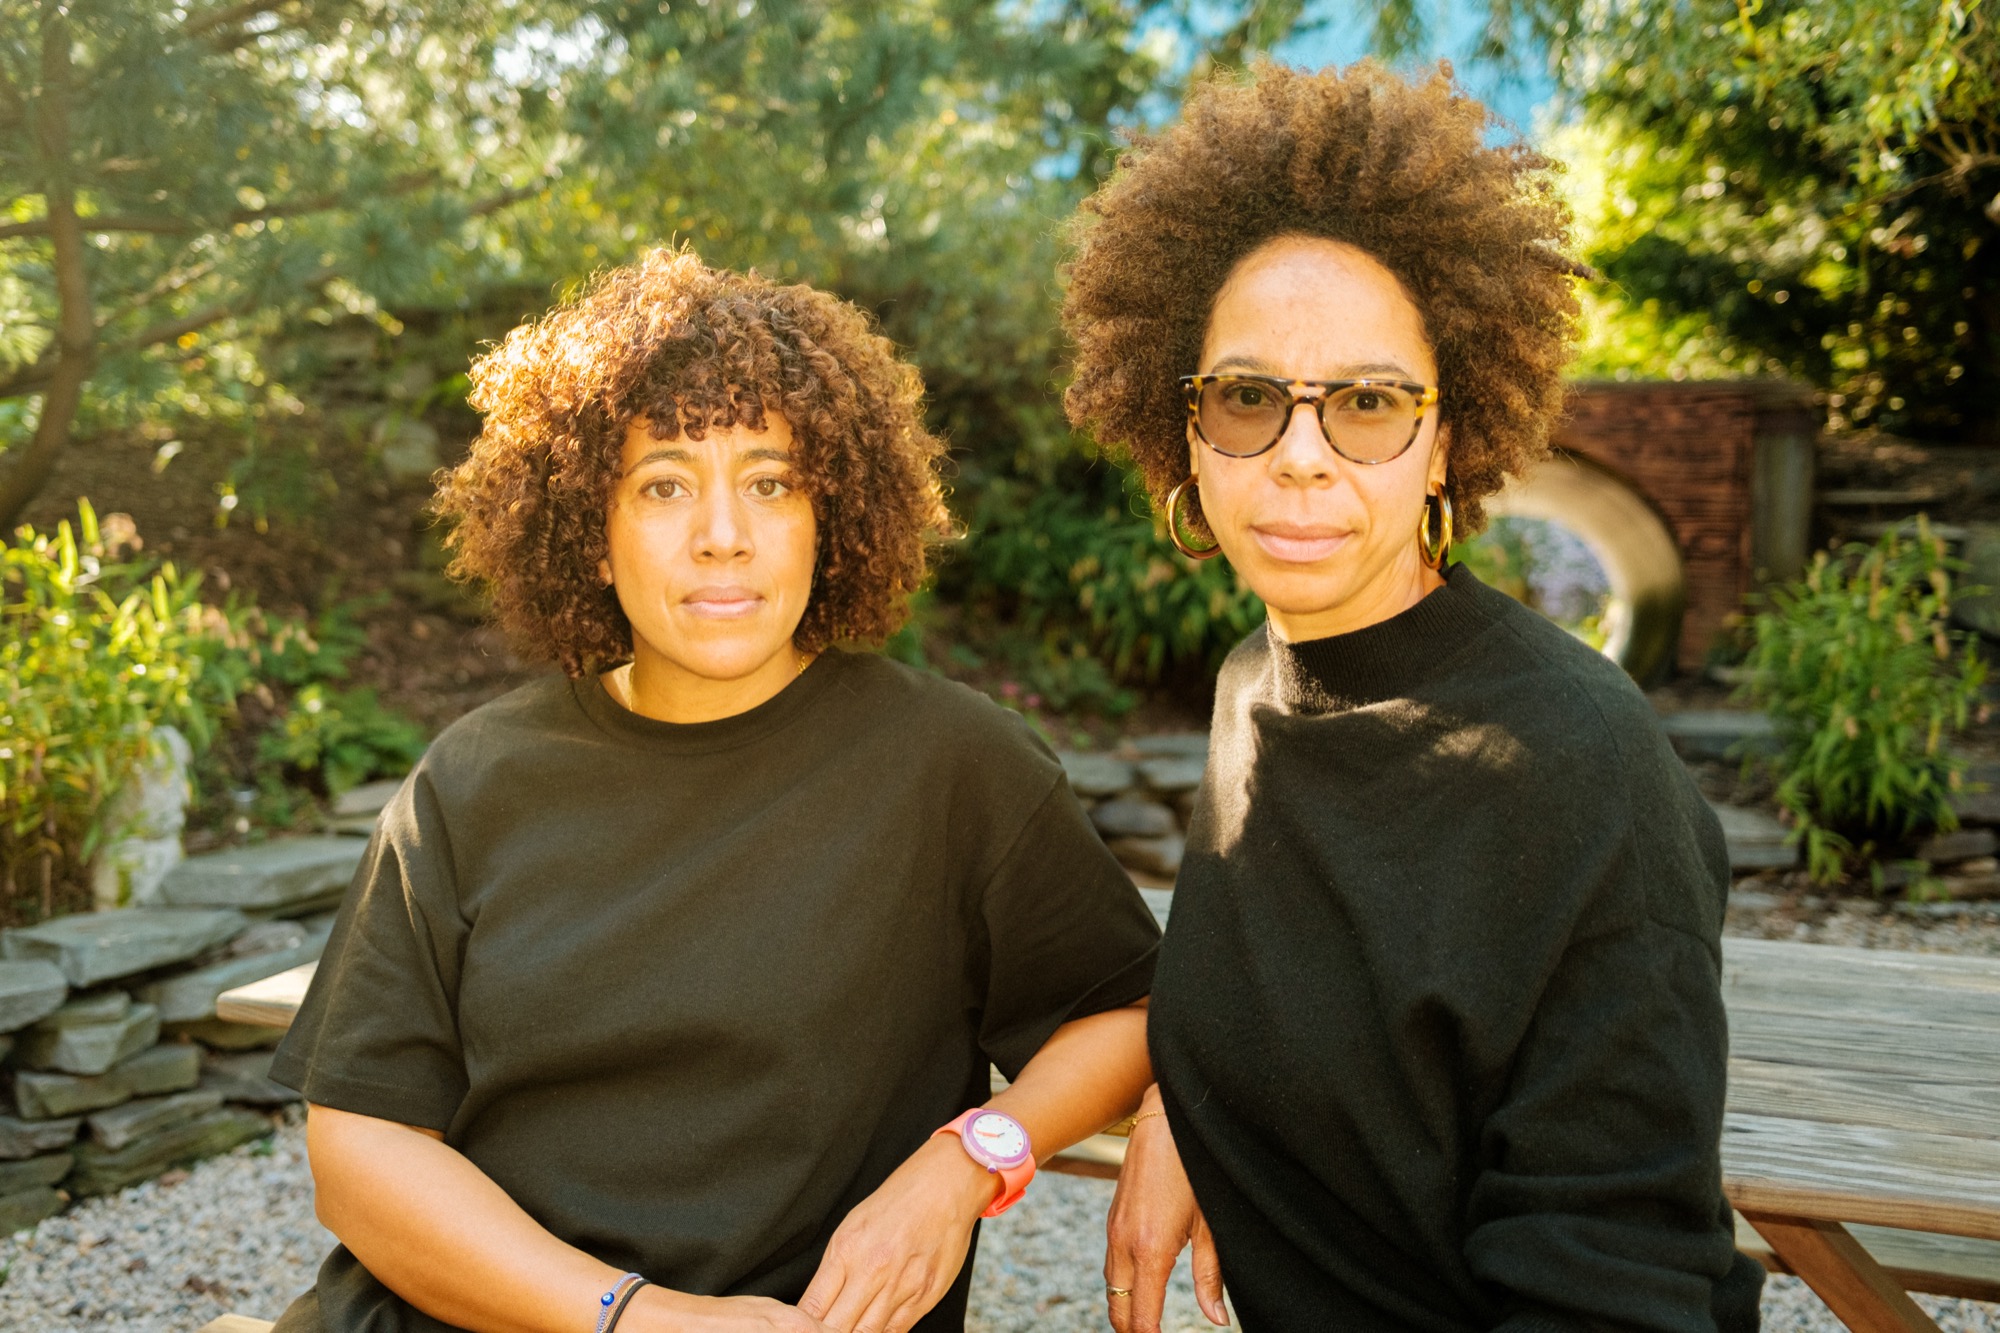 Two Black women wearing black shirts sit in a garden on a sunny day, looking into the camera